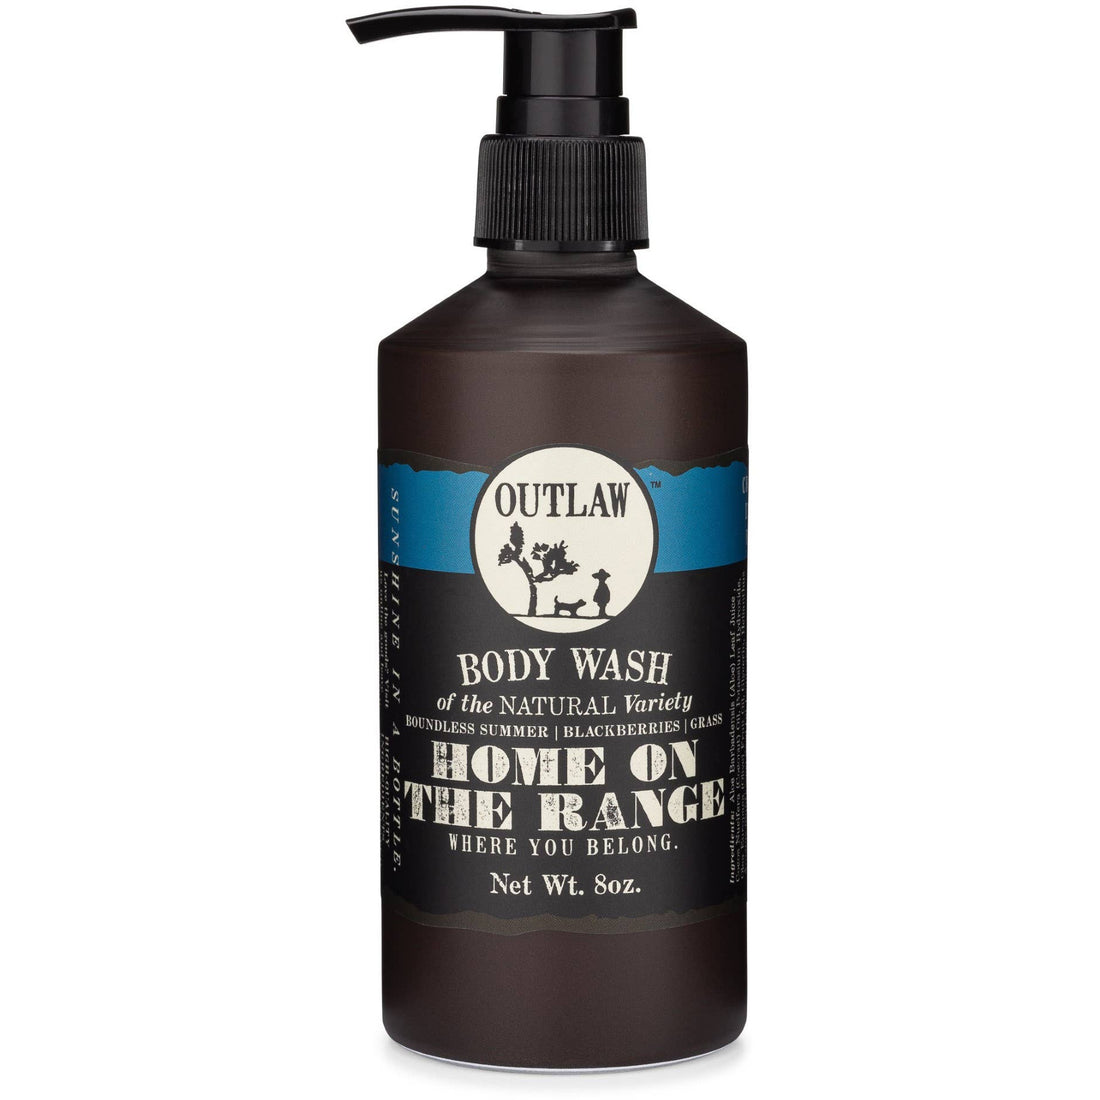 Home On The Range Body Wash